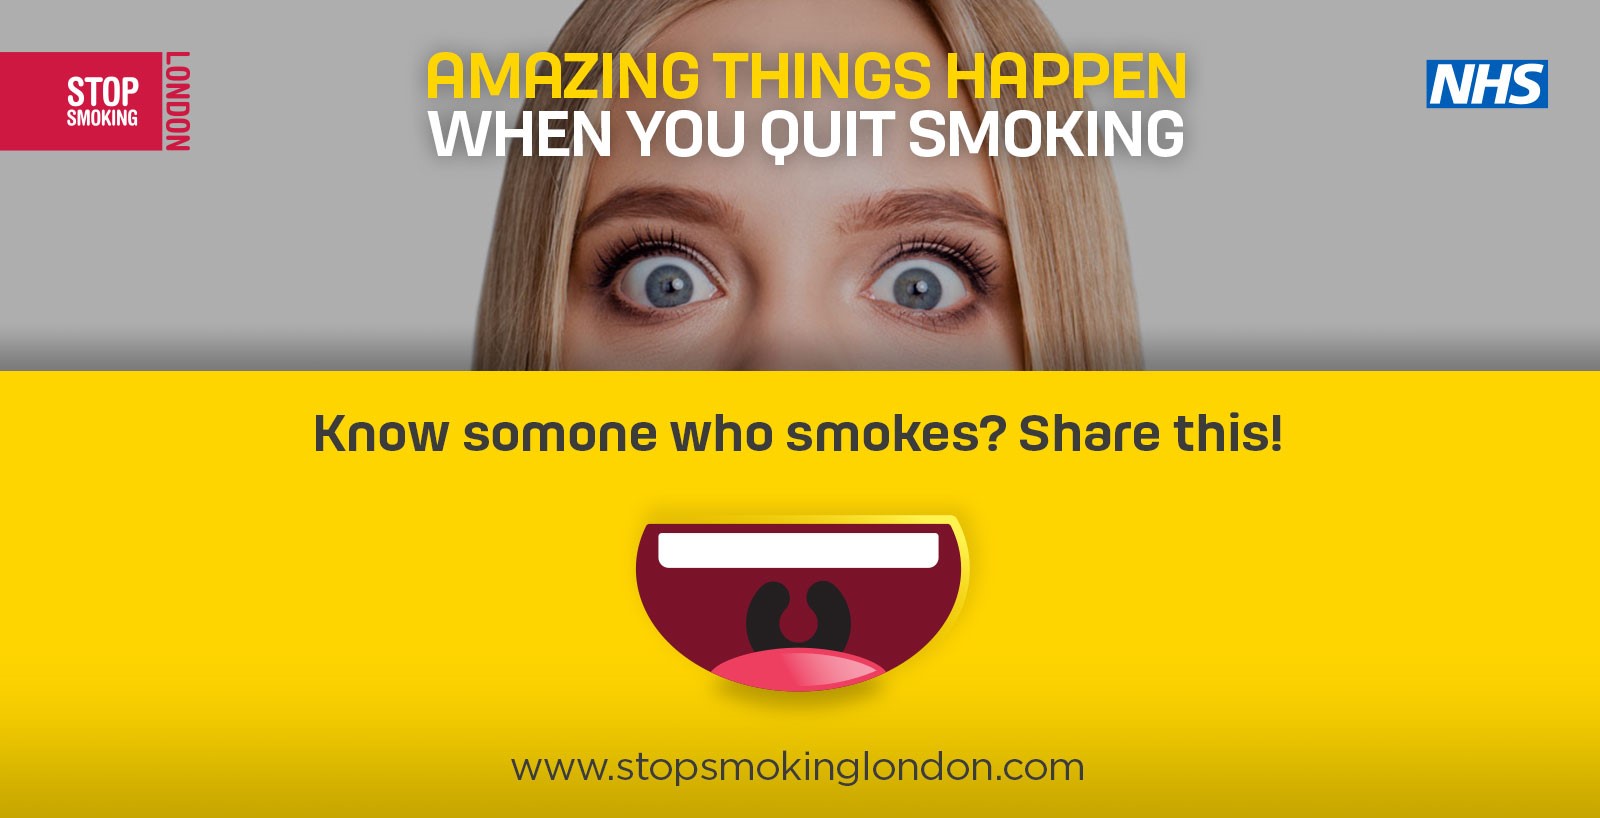 Know someone who smokes? Share this!